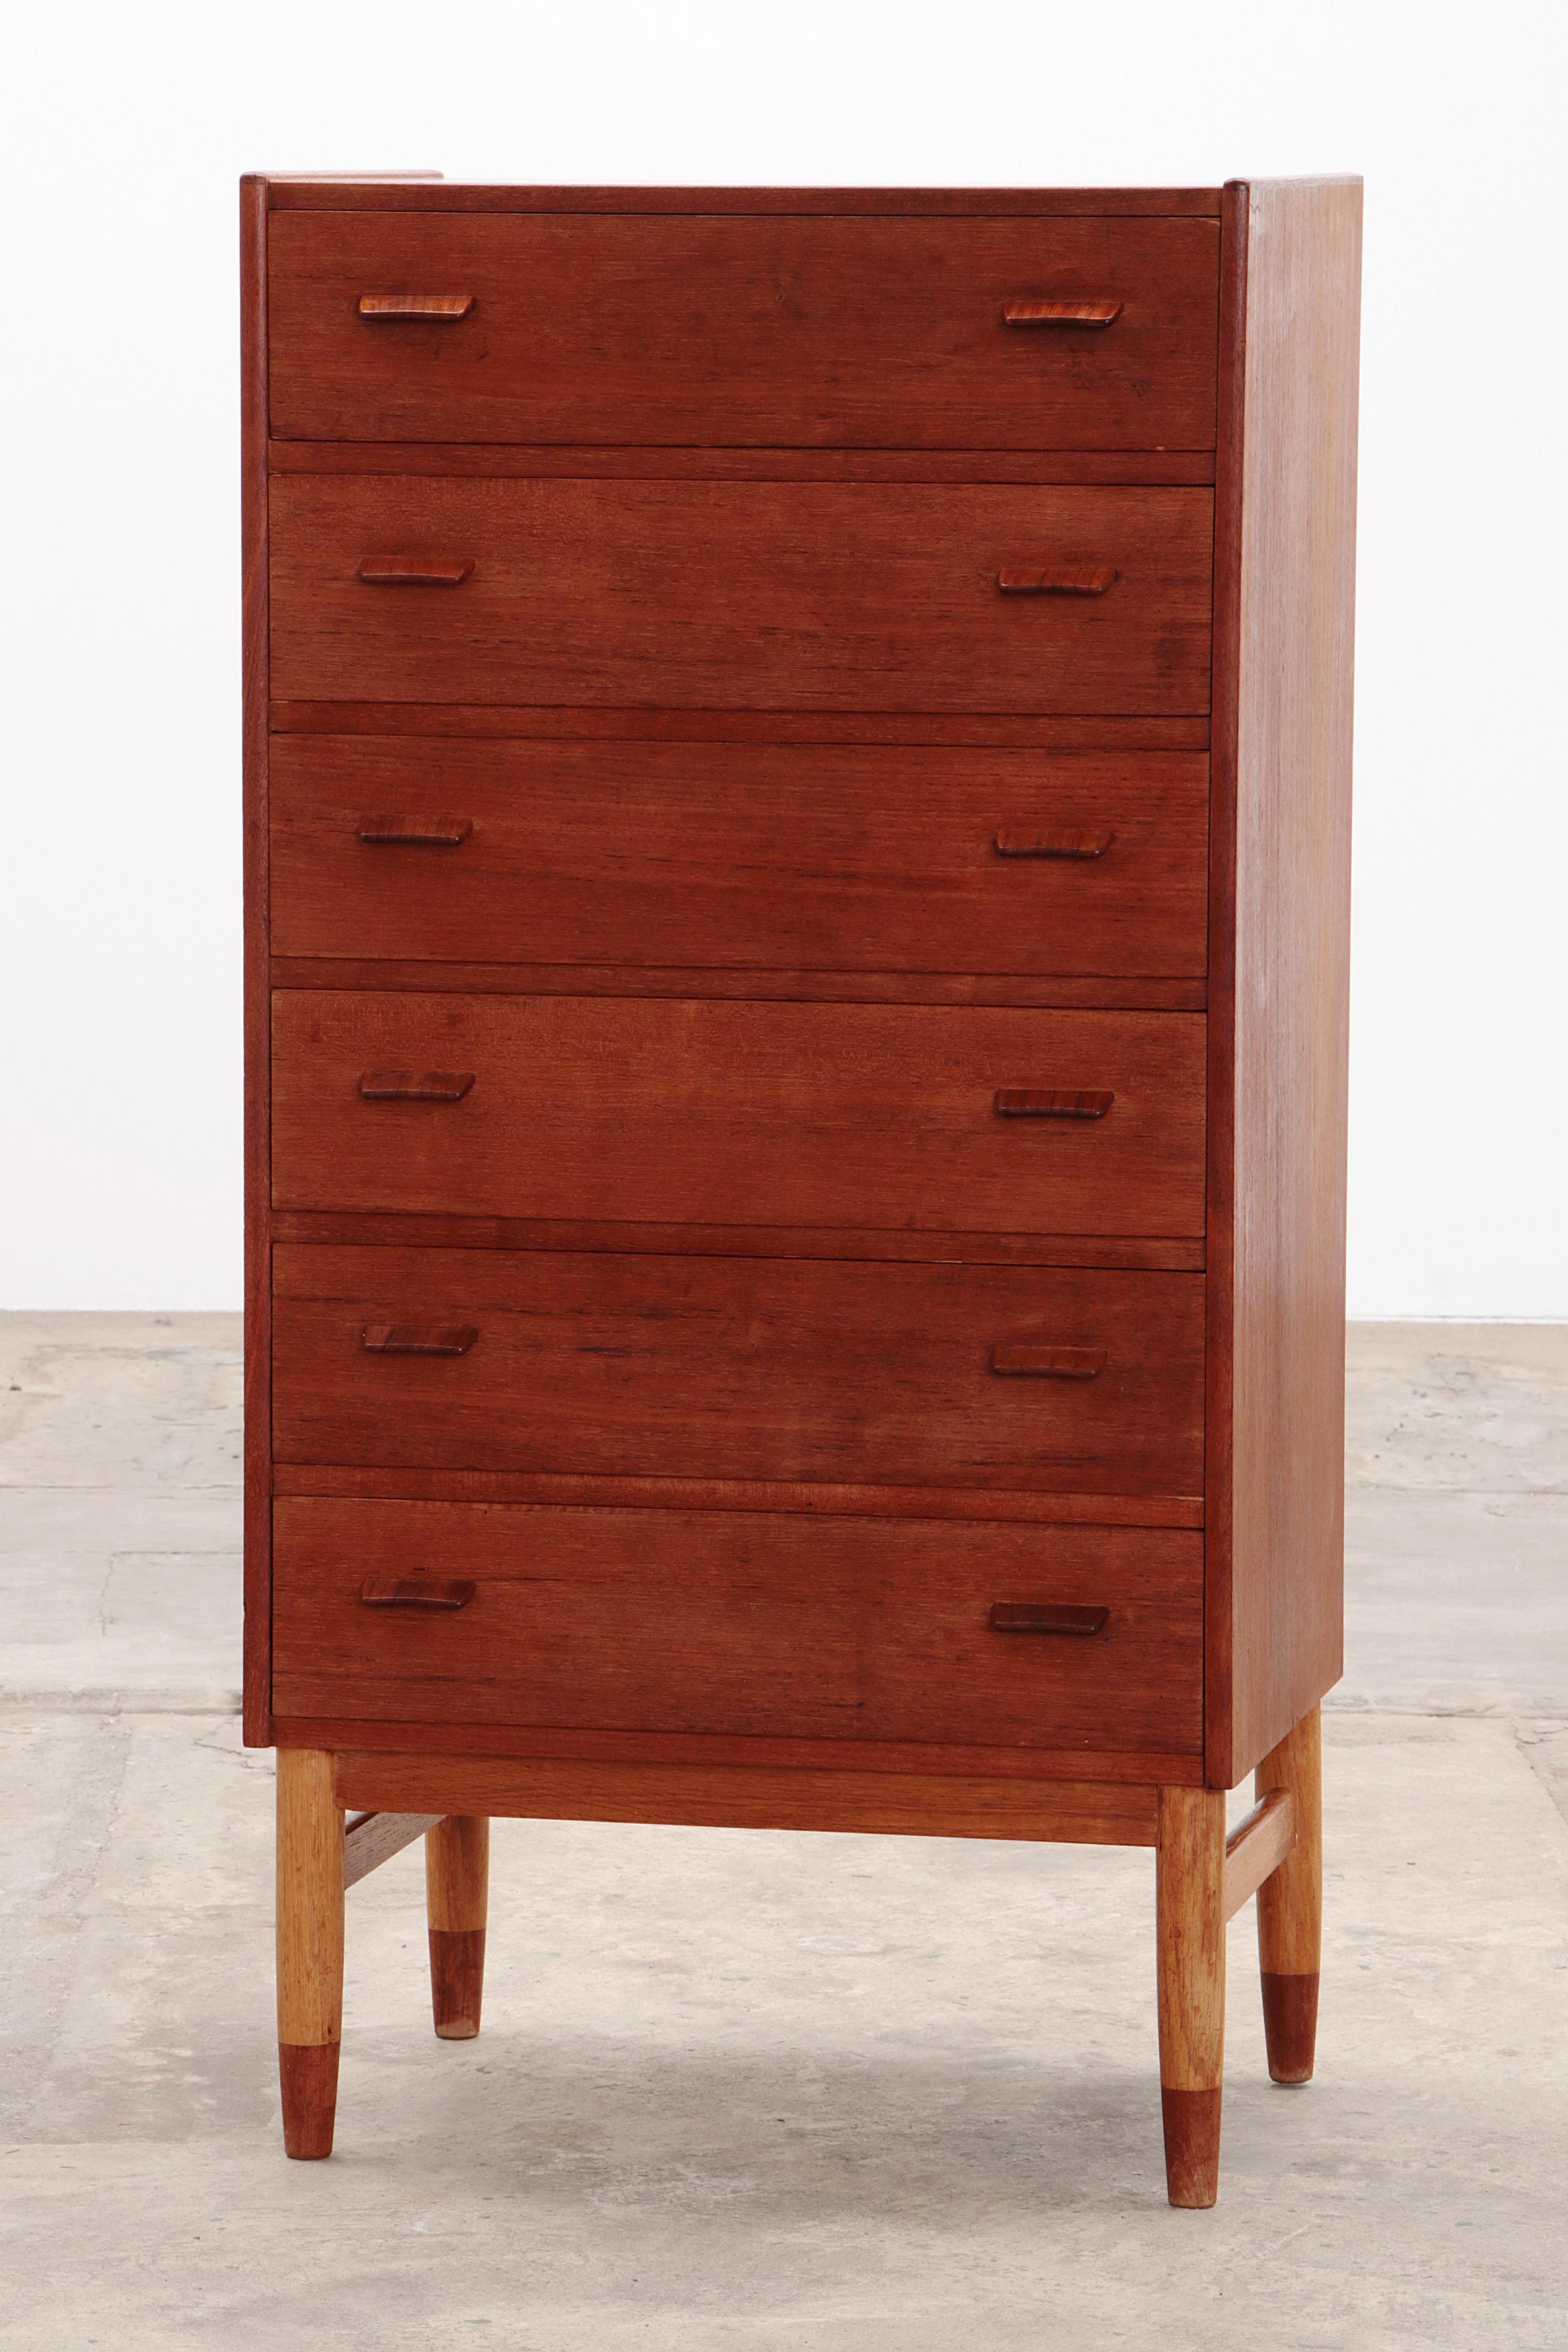 DesignVintage

Design vintage is a term that is music to the ears of lovers of timeless beauty and craftsmanship. This is not just about style, but also about a legacy of quality and sustainability. Take, for example, the beautiful teak chest of